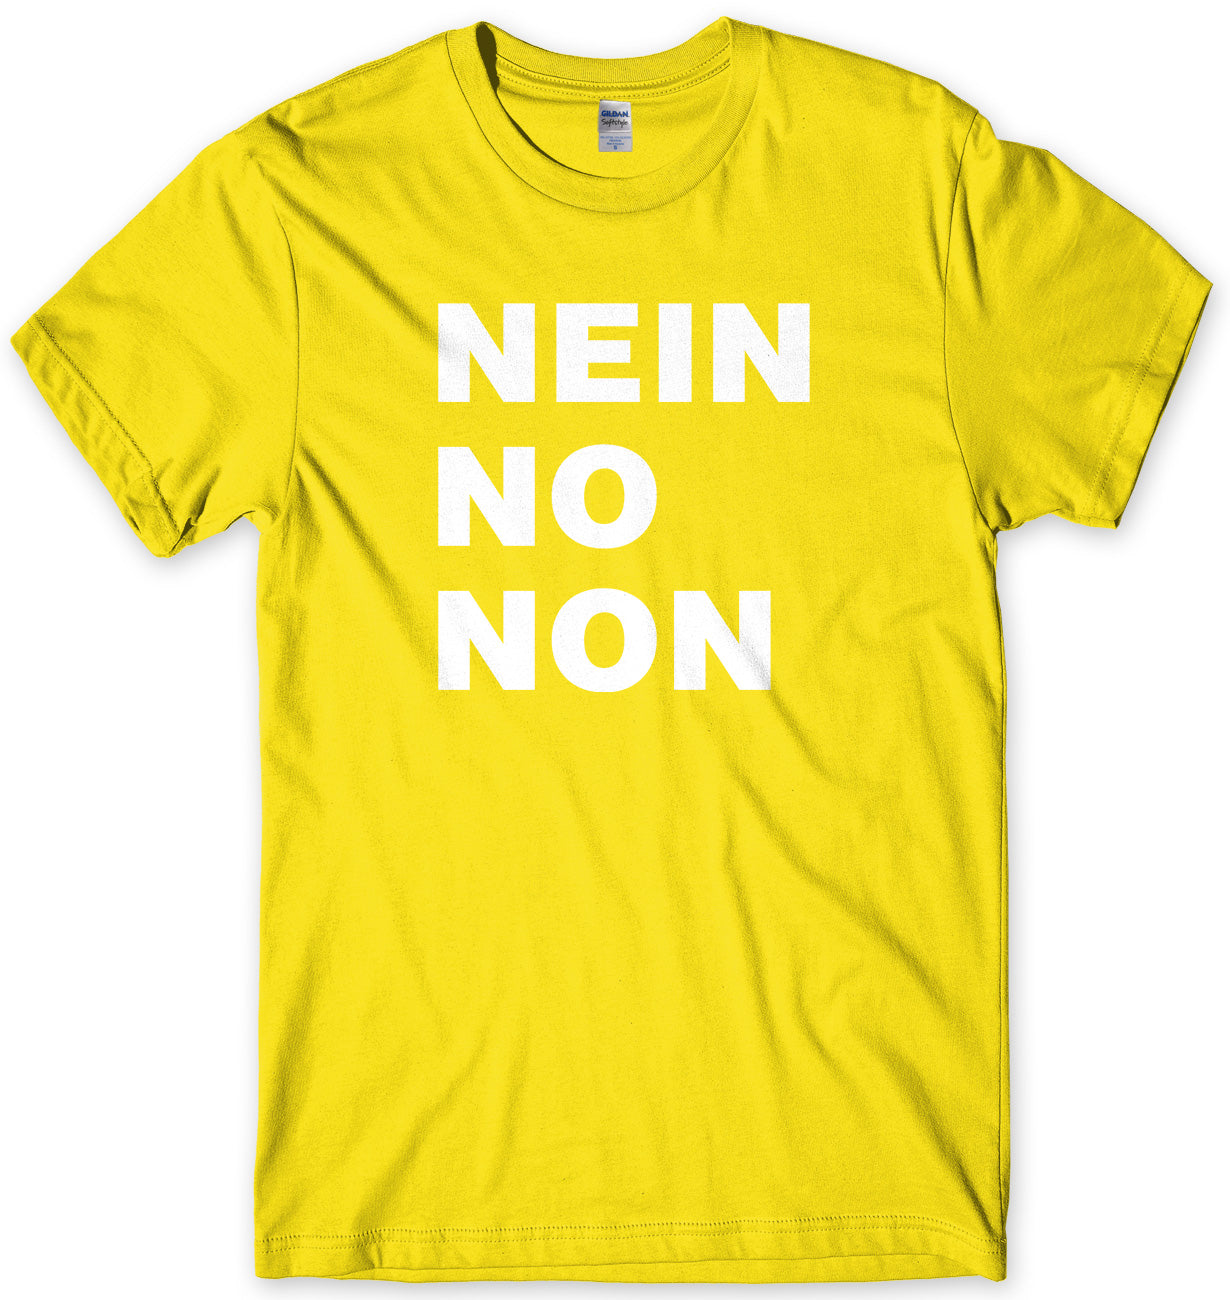 NEIN NO NON AS WORN BY THOM YORKE MENS UNISEX T-SHIRT